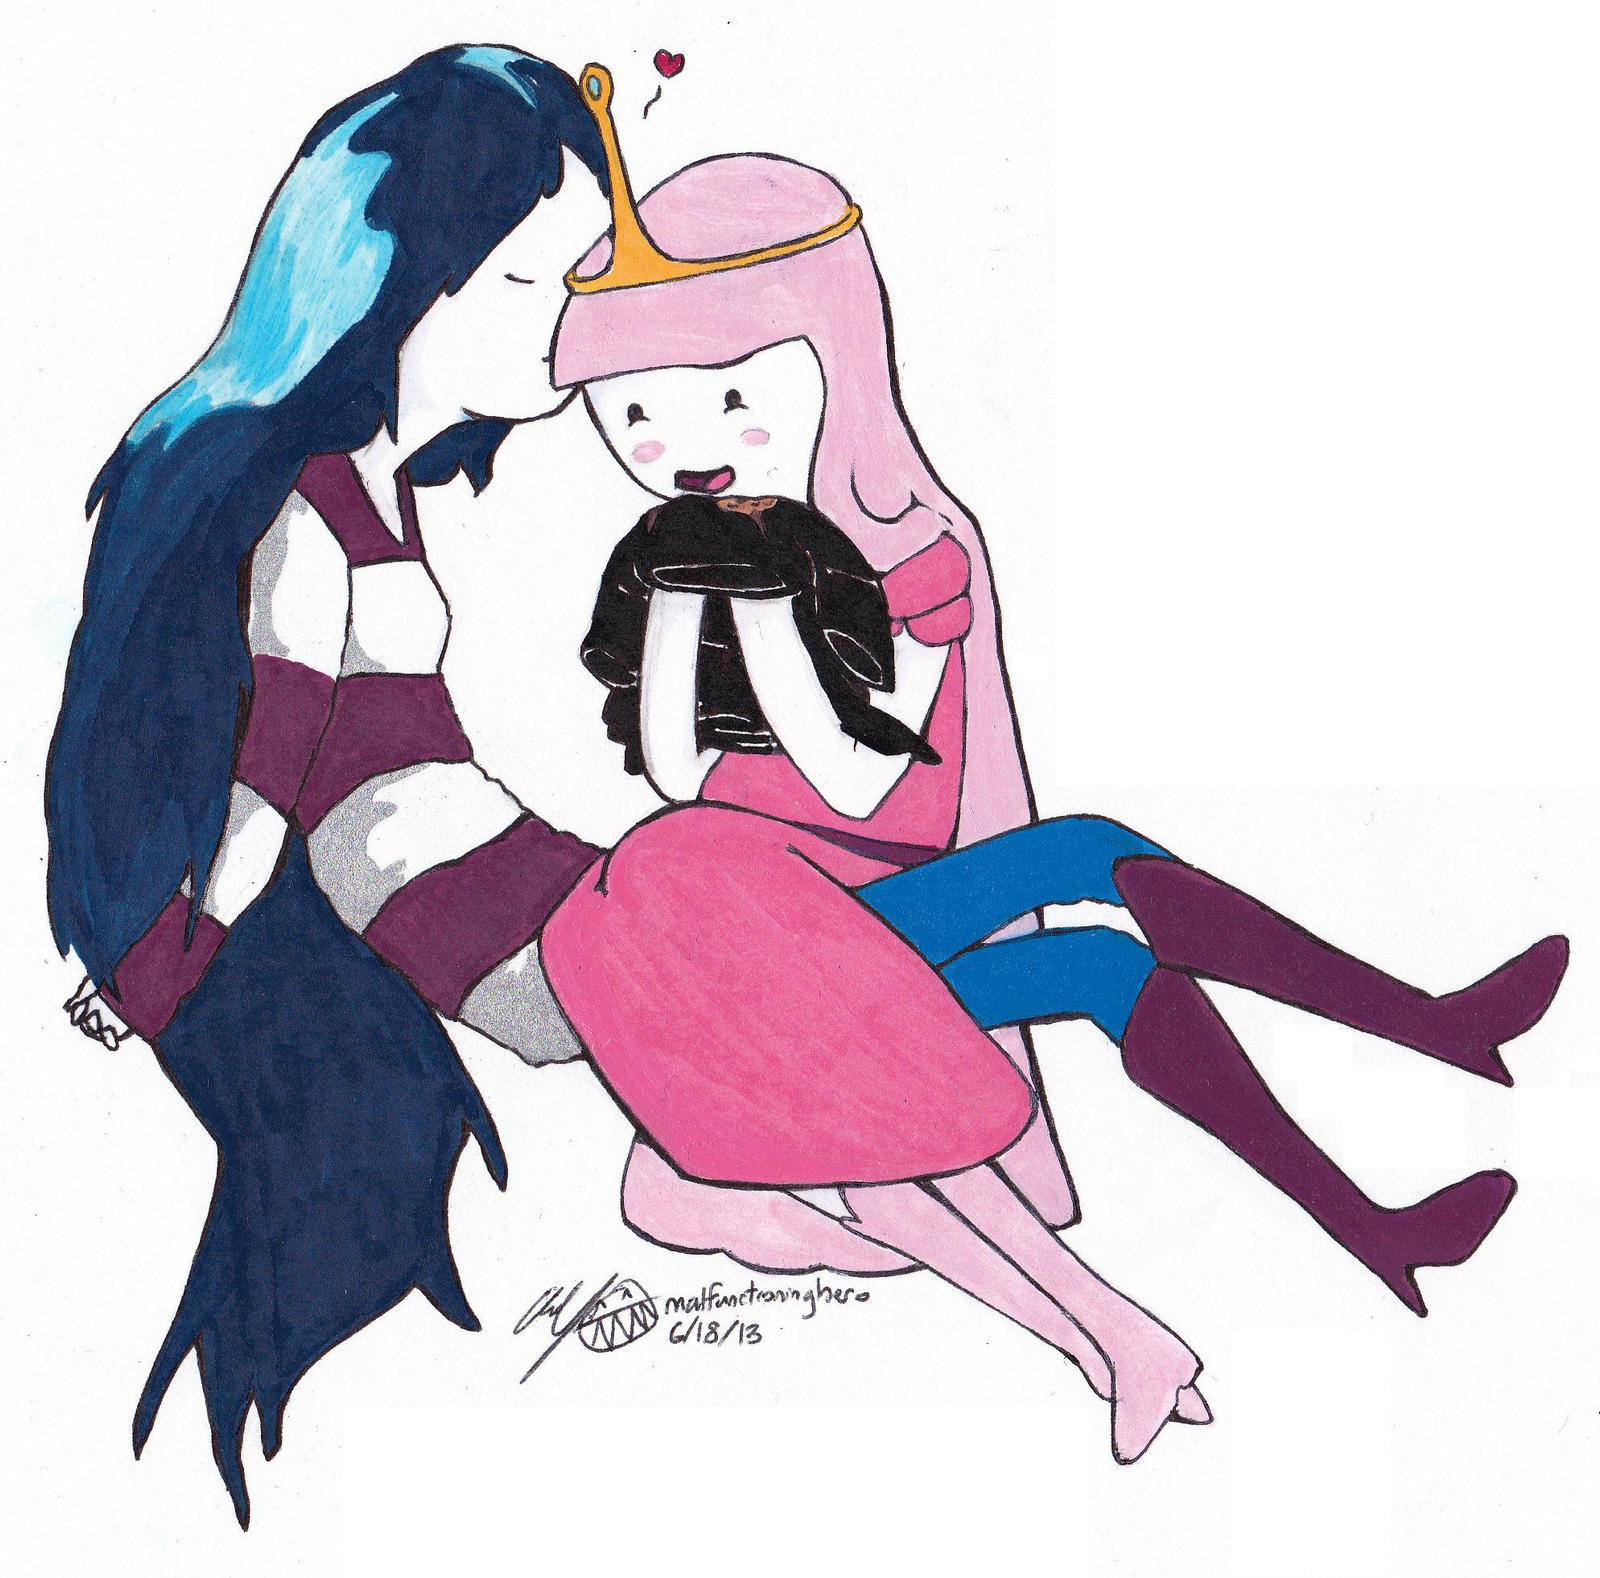 See more ideas about marceline, princess bubblegum, marceline and princess bubblegu...